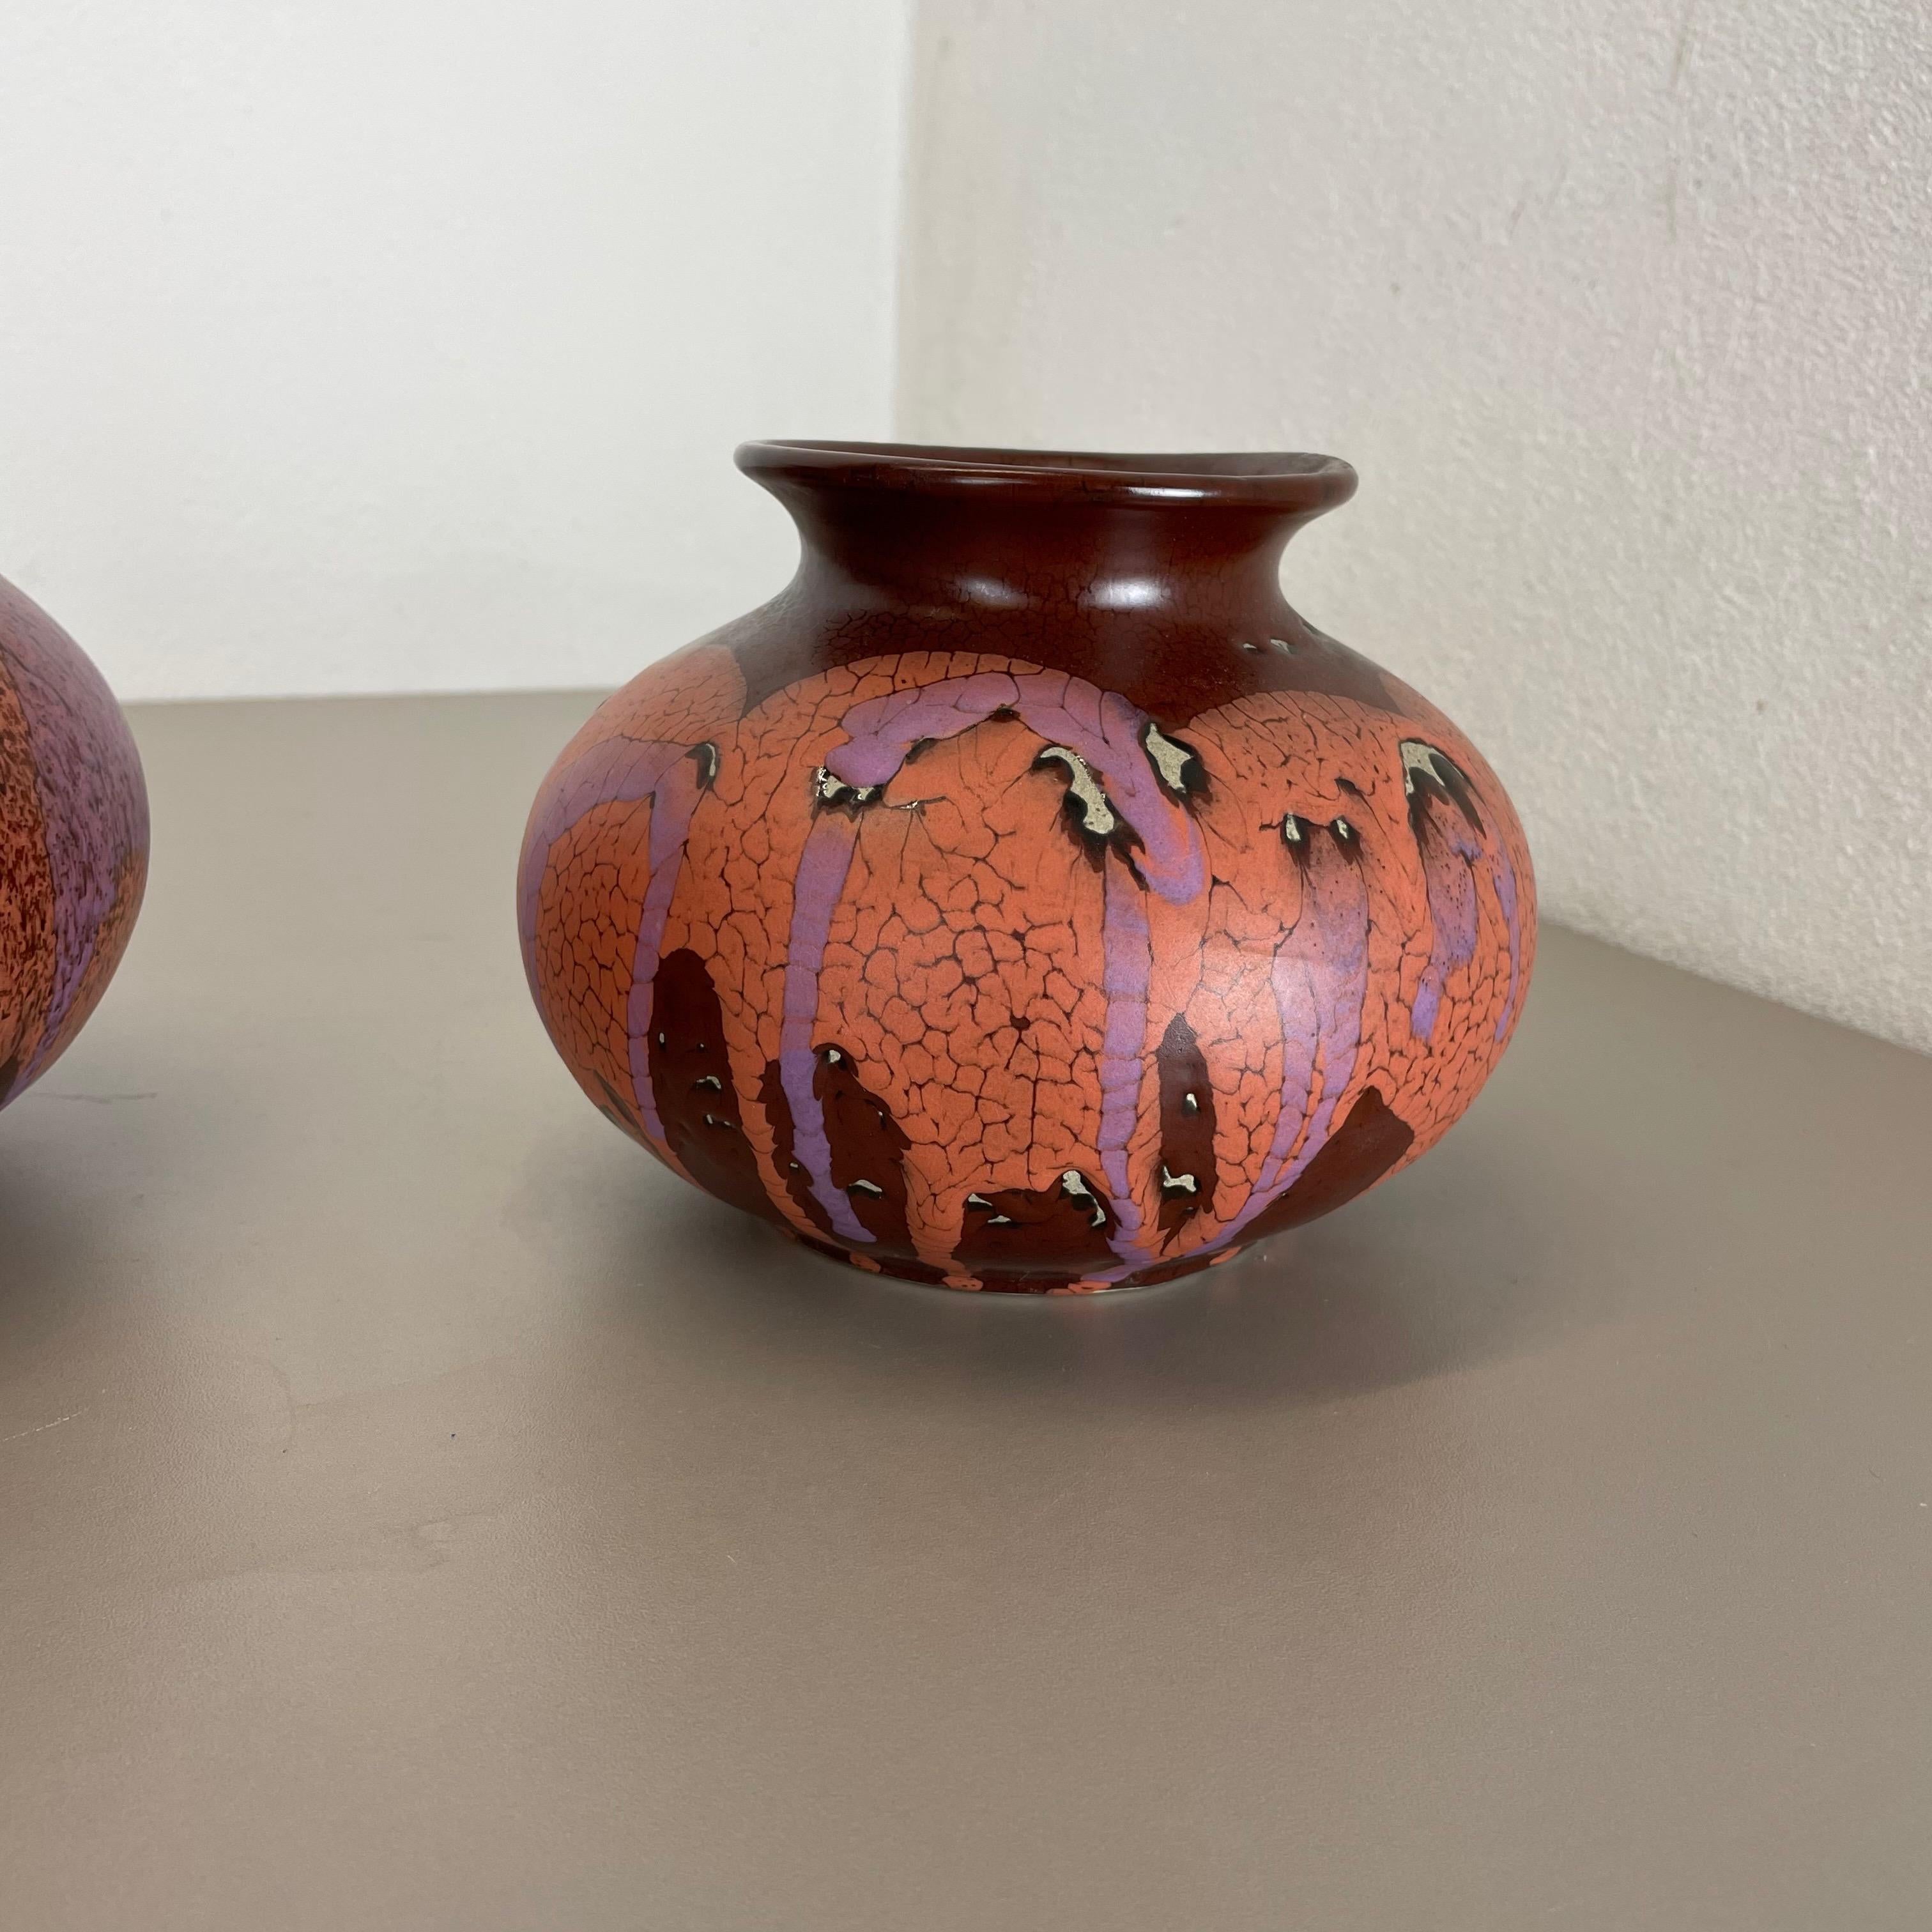 20th Century Set of Two Pottery Vases Objects by Steuler Ceramics, Germany, 1970s For Sale